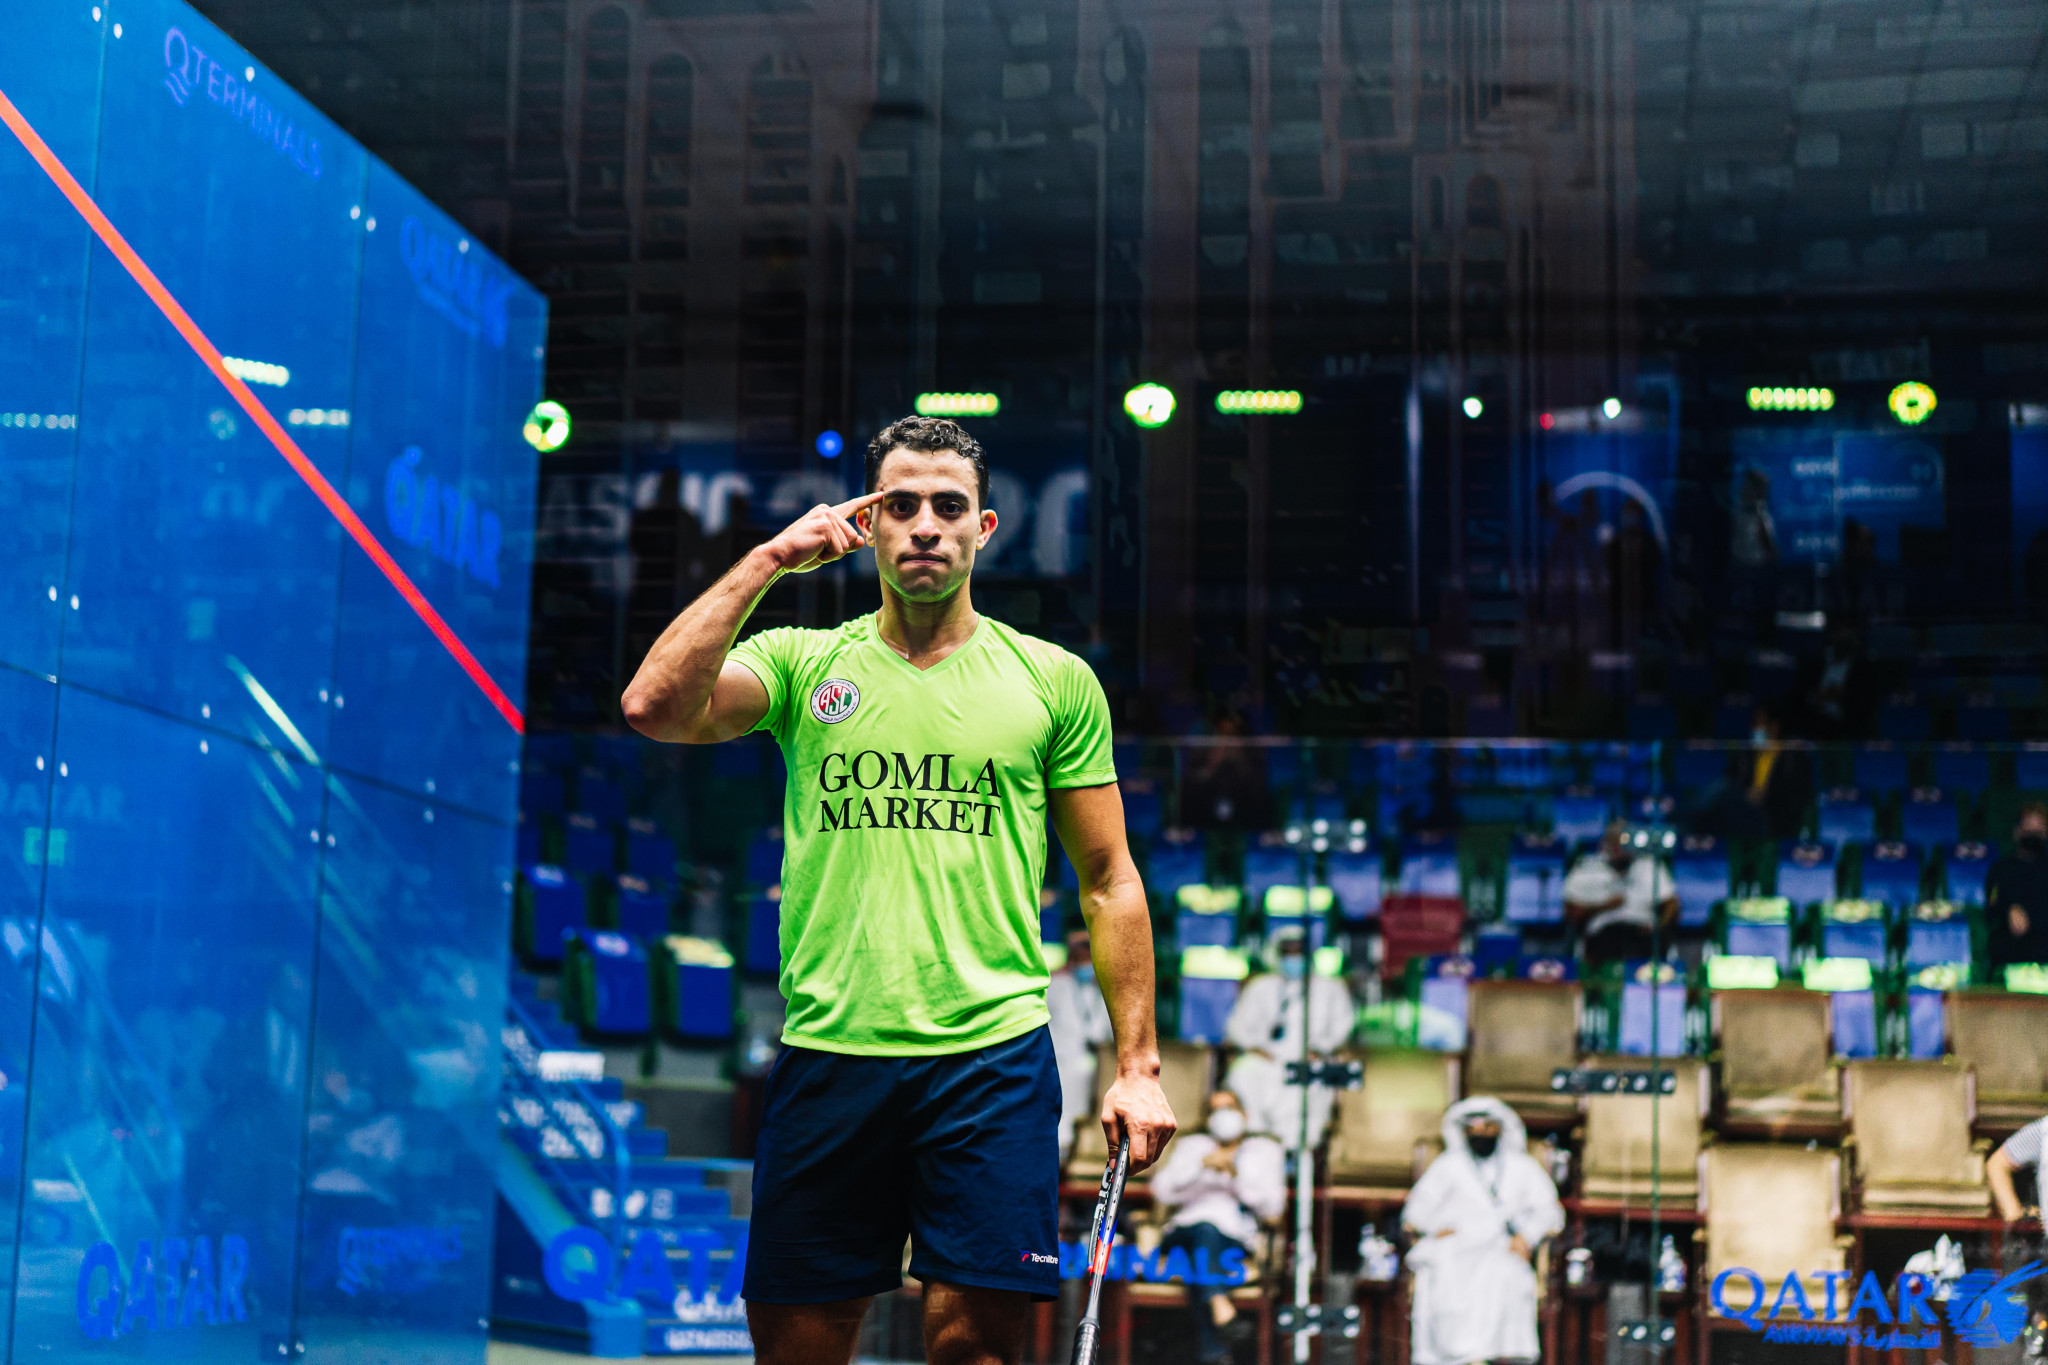 World number one Farag sets up semi-final with world champion Momen at PSA Qatar Classic